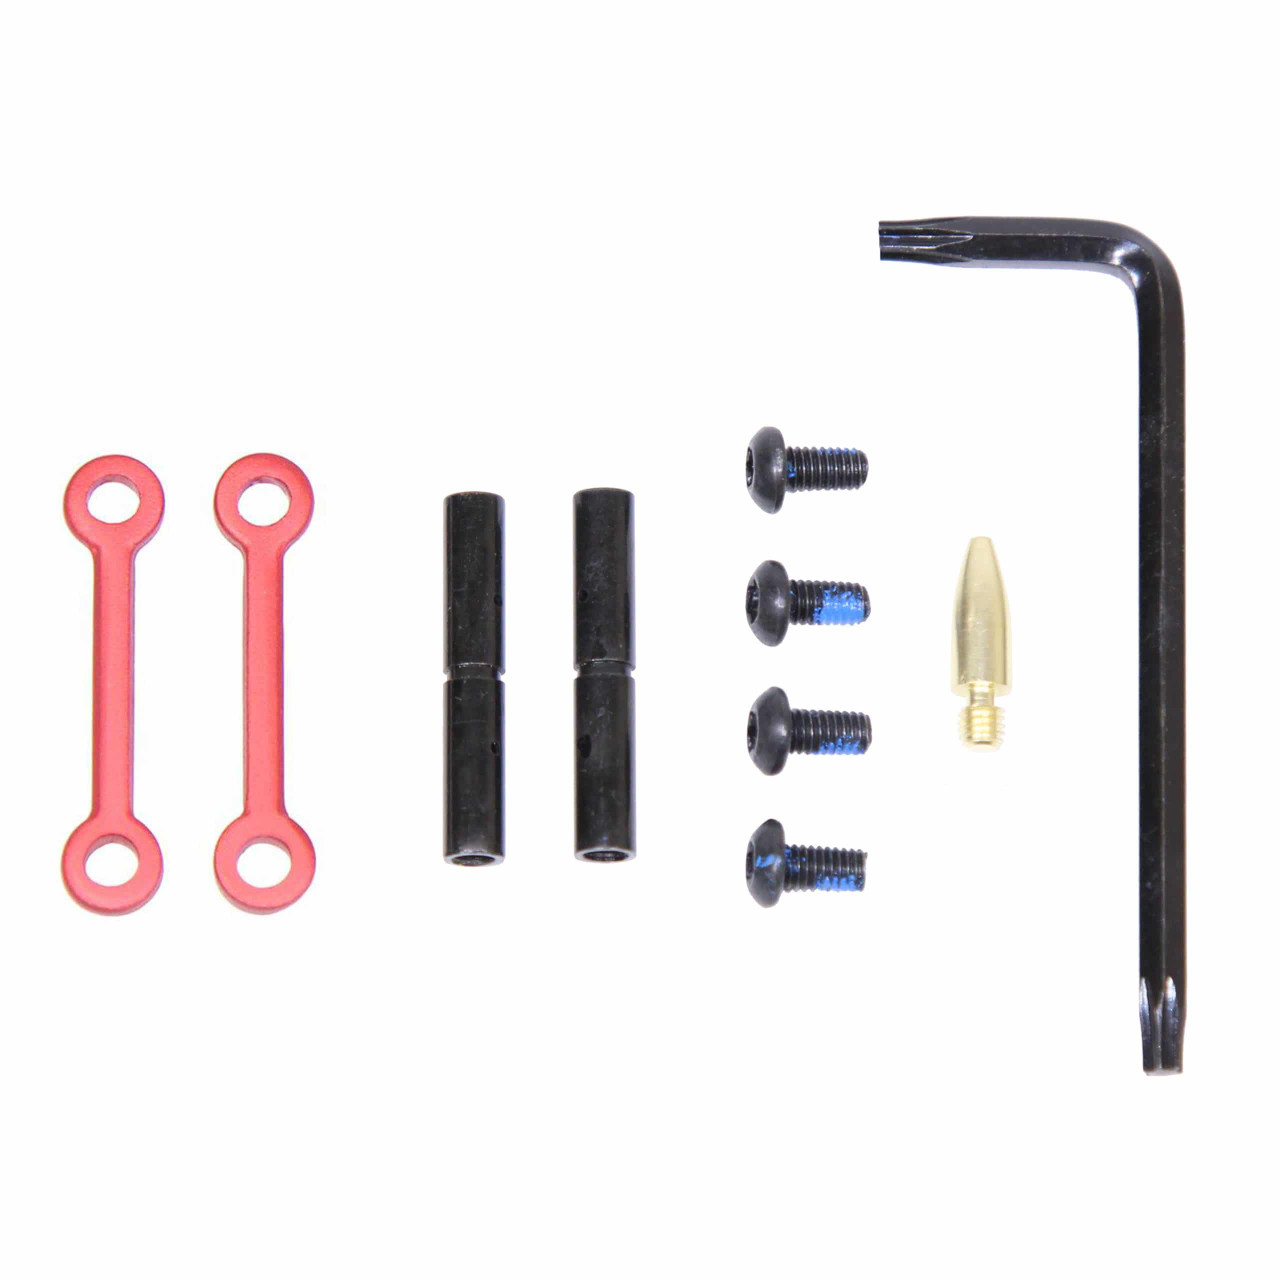 Guntec USA GT-ARP-RED Complete Anti-Rotation Trigger/Hammer Pin Set (Anodized Red)